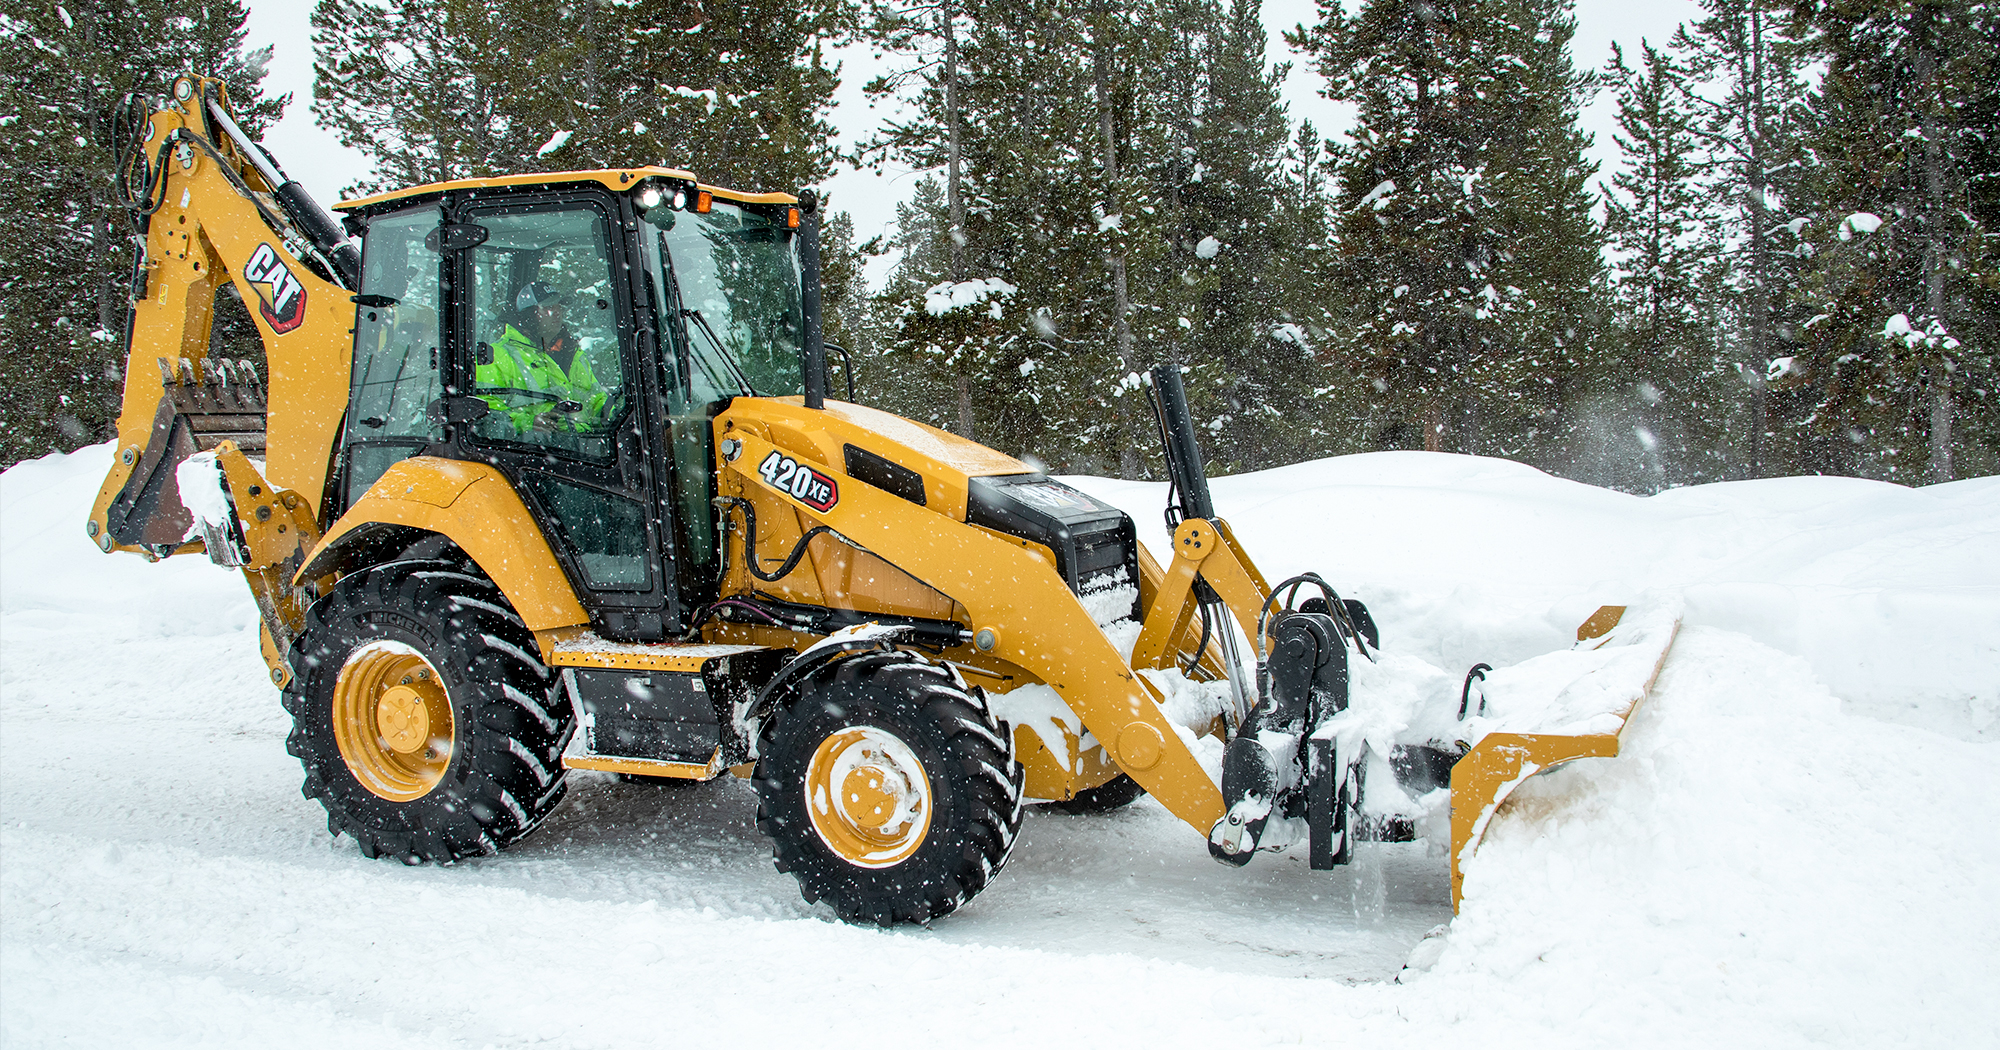 Top Cat® equipment for an effective snow removal season